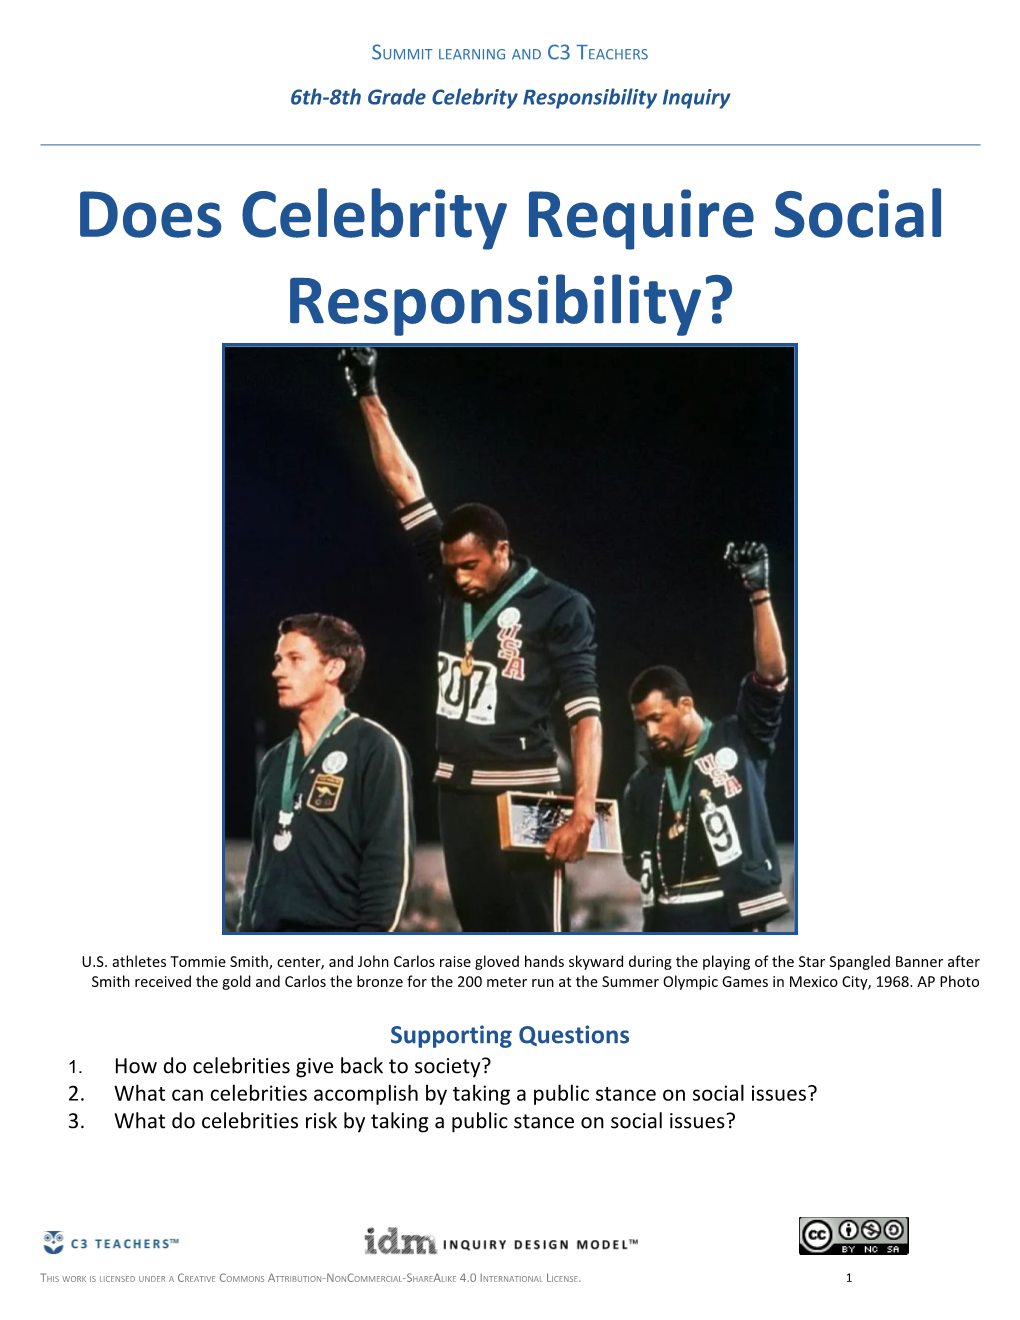 Does Celebrity Require Social Responsibility?